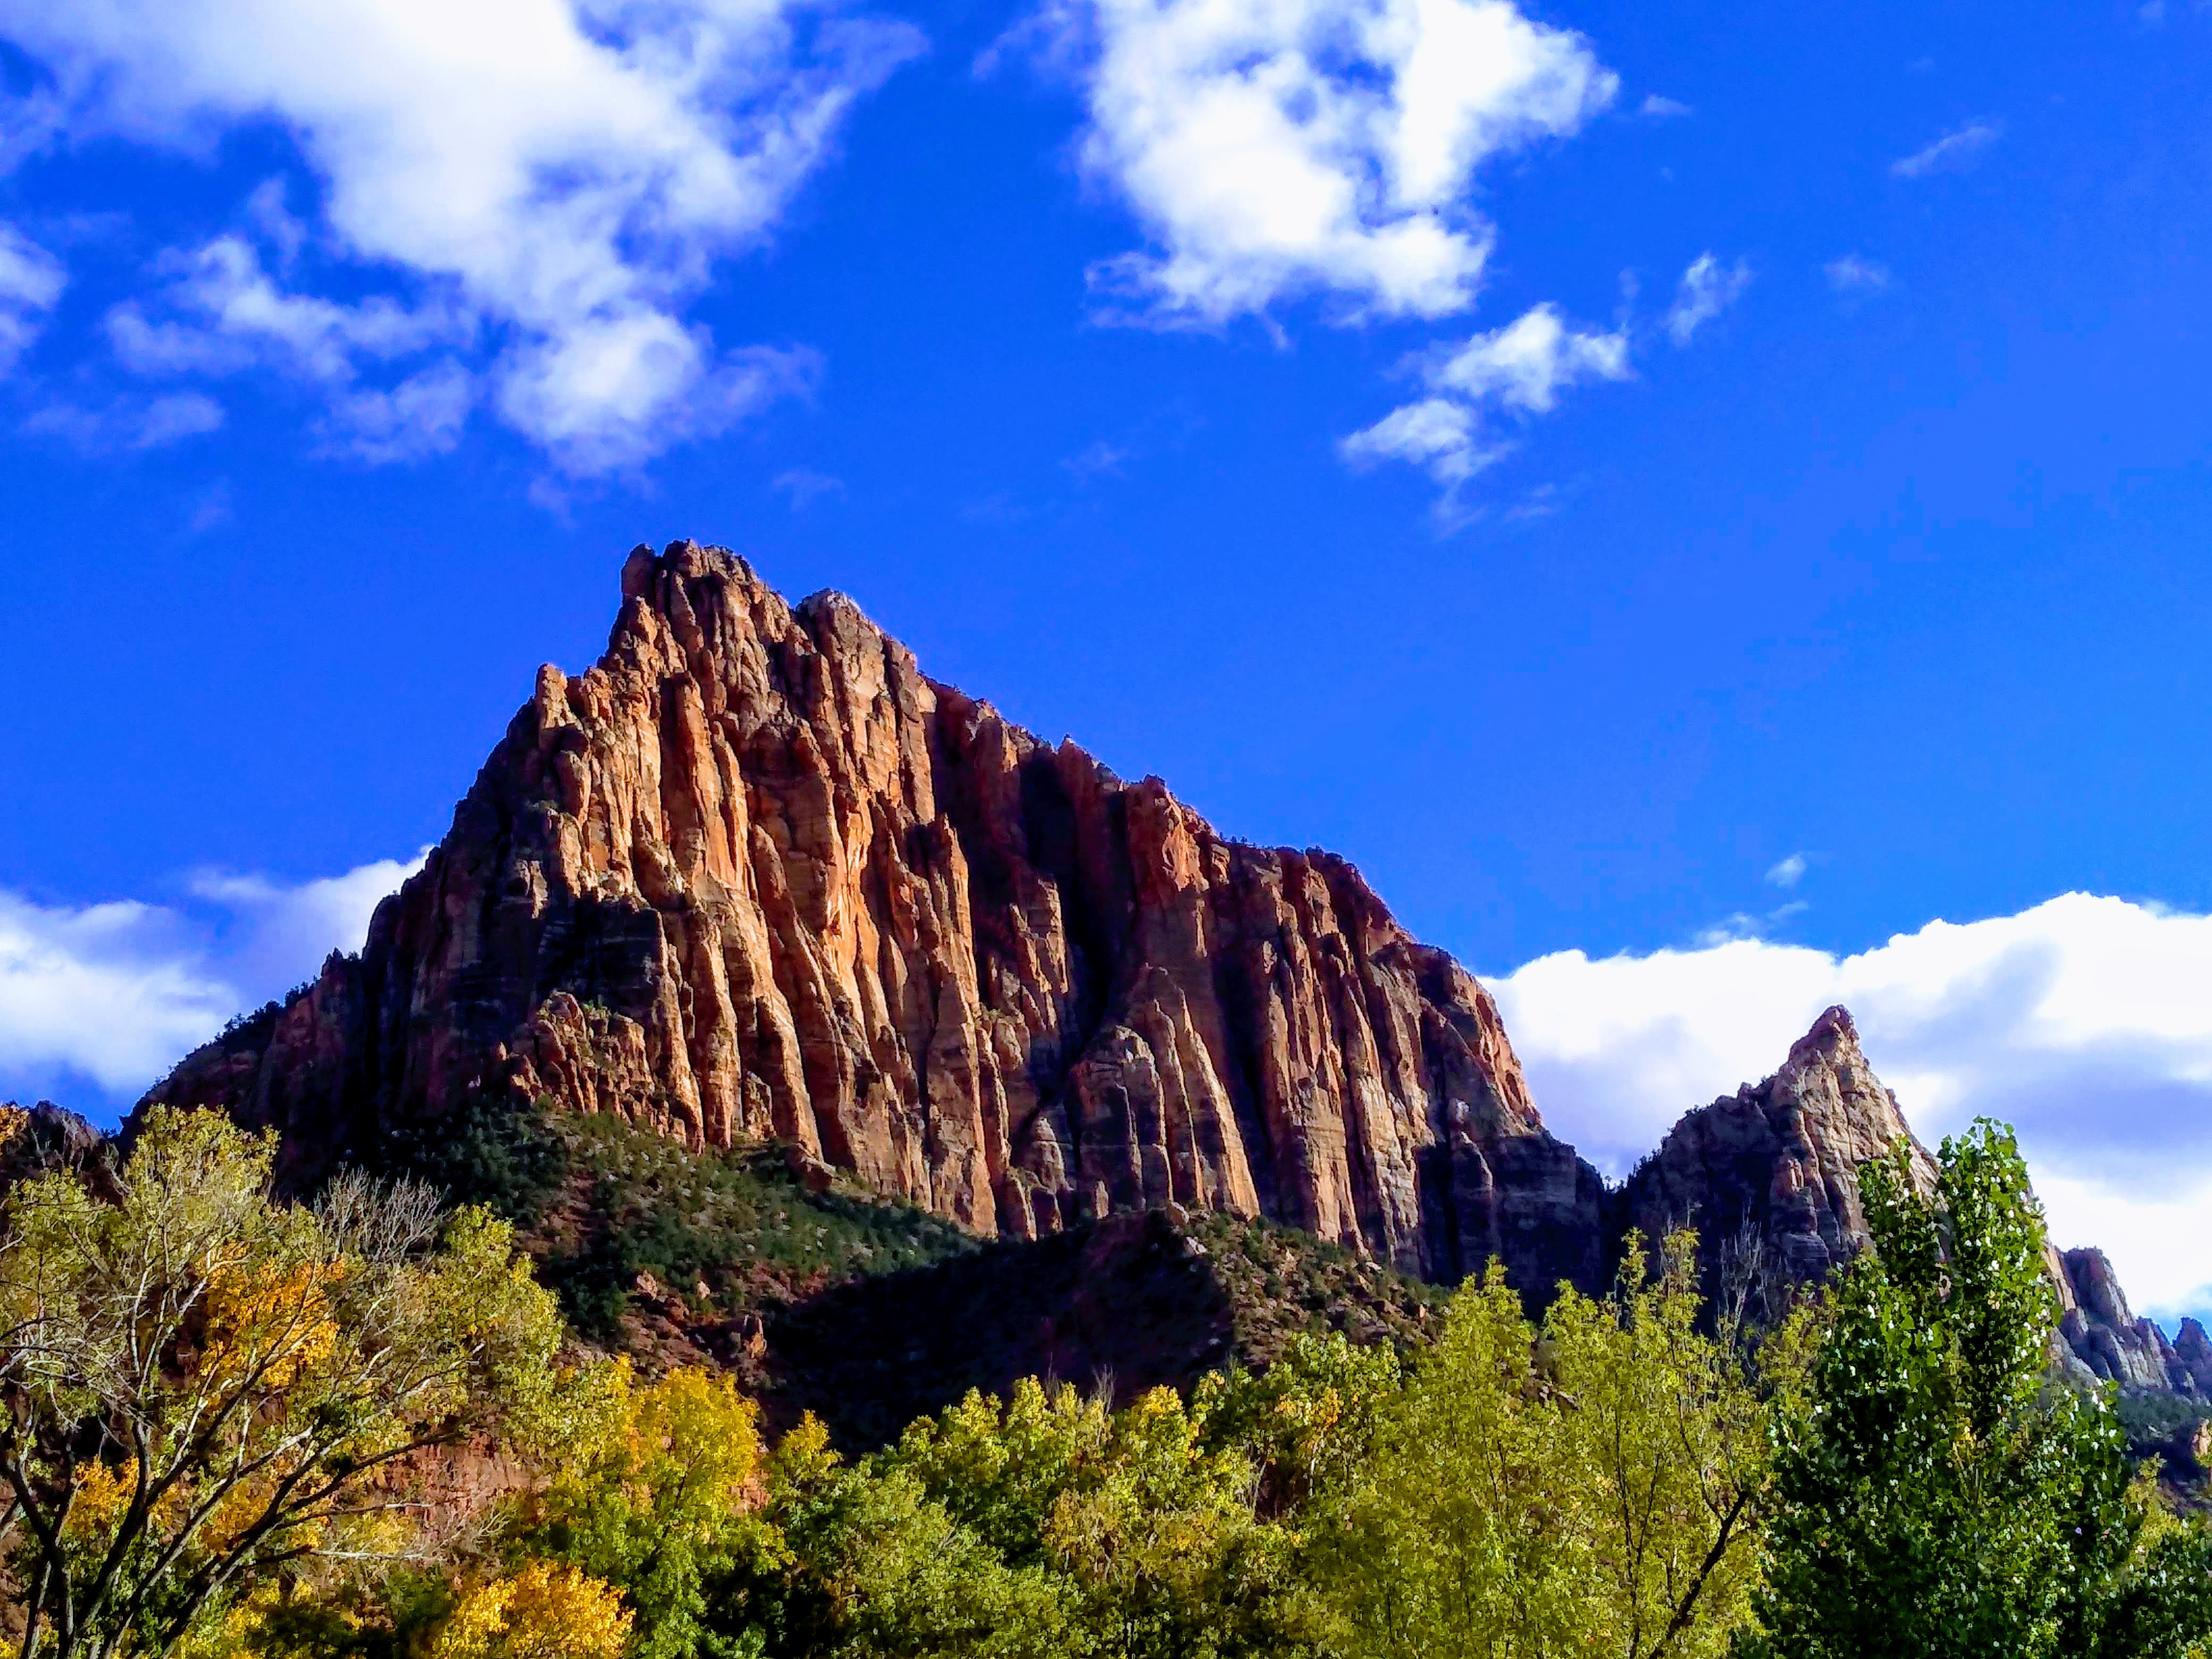 1-Day Bryce Canyon & Zion National Parks Day Tour From Las Vegas with Lunch